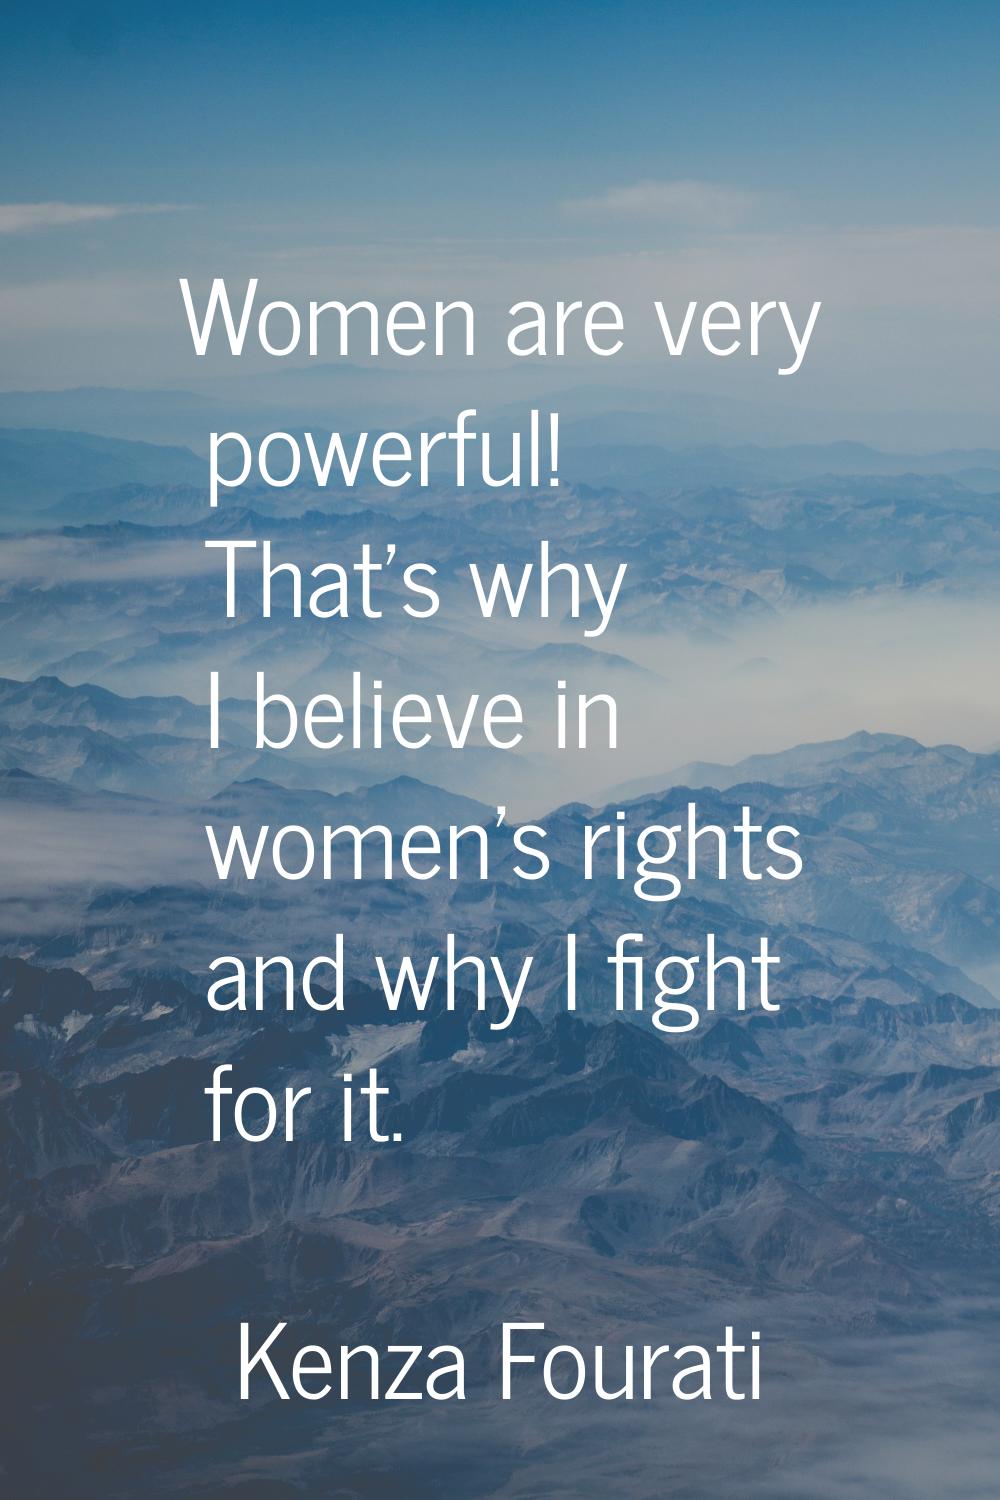 Women are very powerful! That's why I believe in women's rights and why I fight for it.